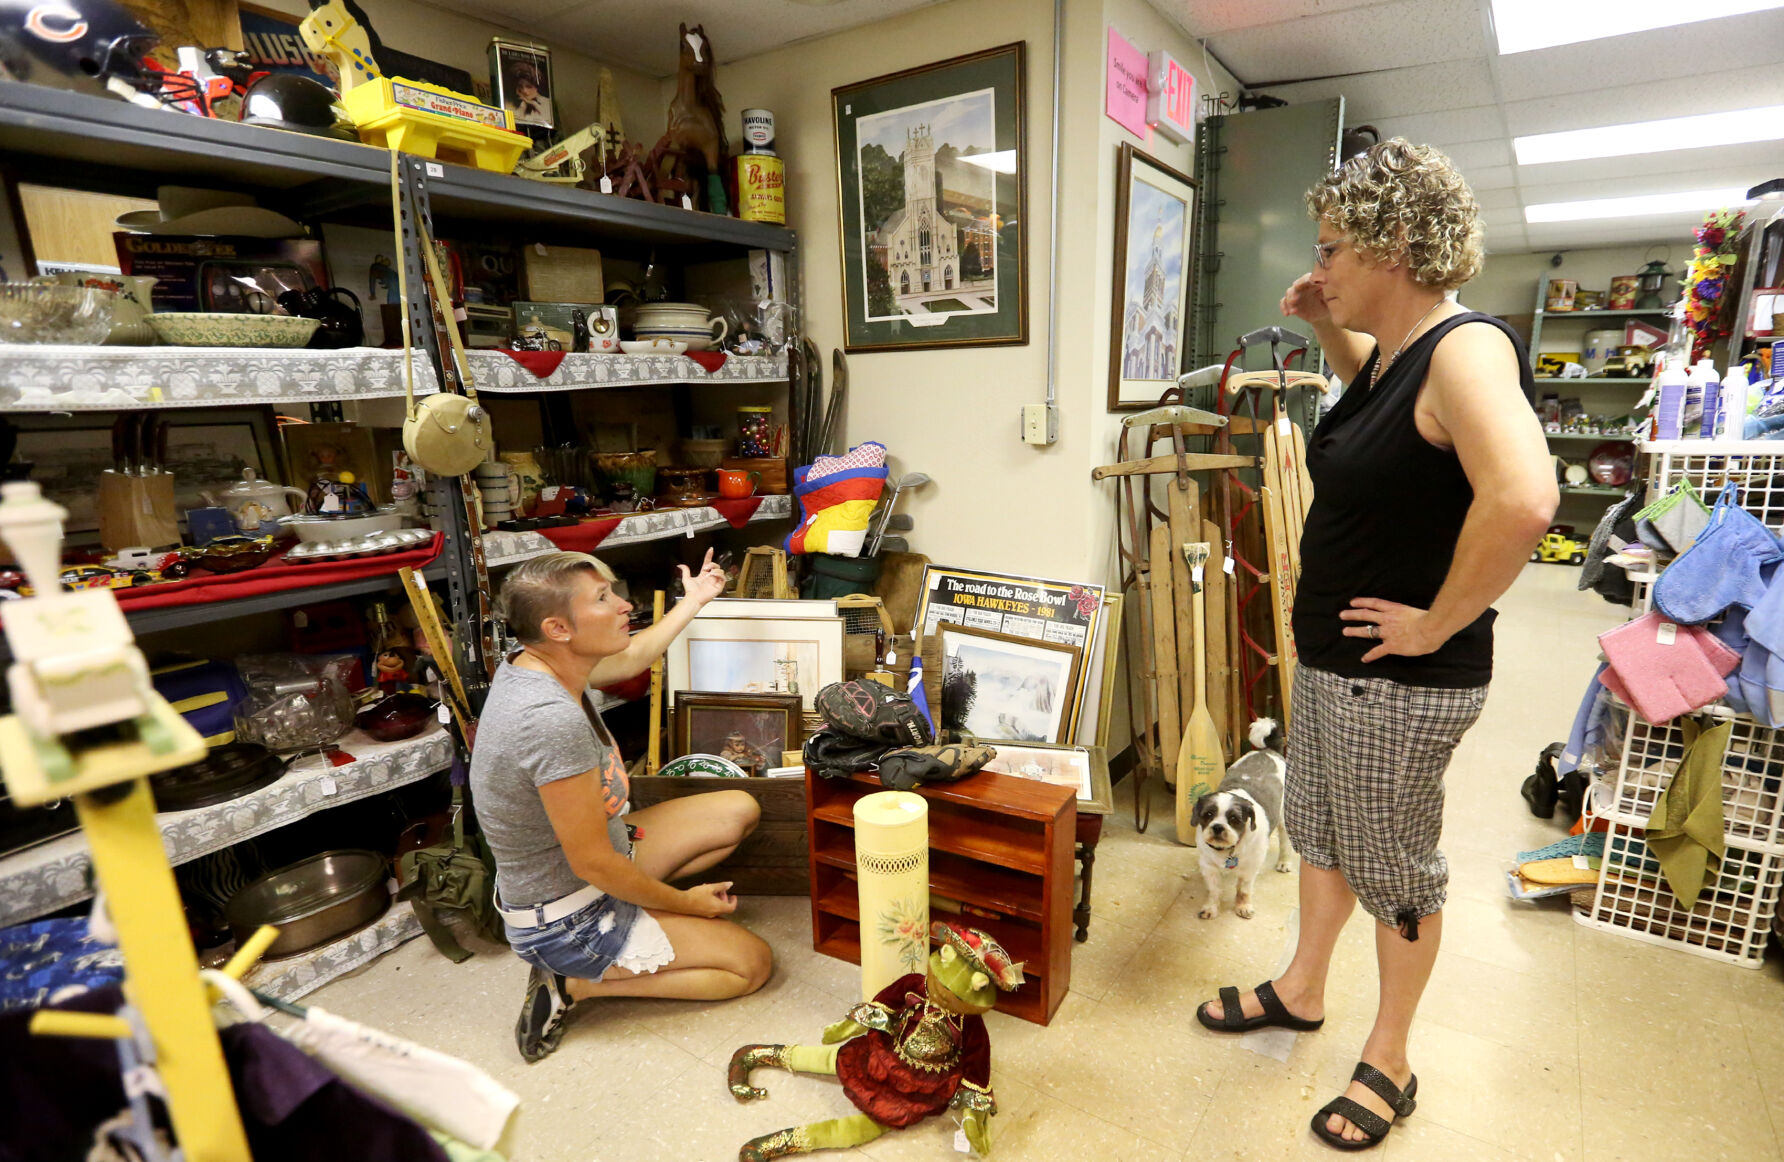 Lisa Appel, of East Dubuque, Ill., talks with Lisa Hammel at Shaggy’s Indoor Flea Market in Dubuque in 2017. Lisa and her dad, Jim Appel, sell merchandise at the store.    PHOTO CREDIT: Jessica Reilly